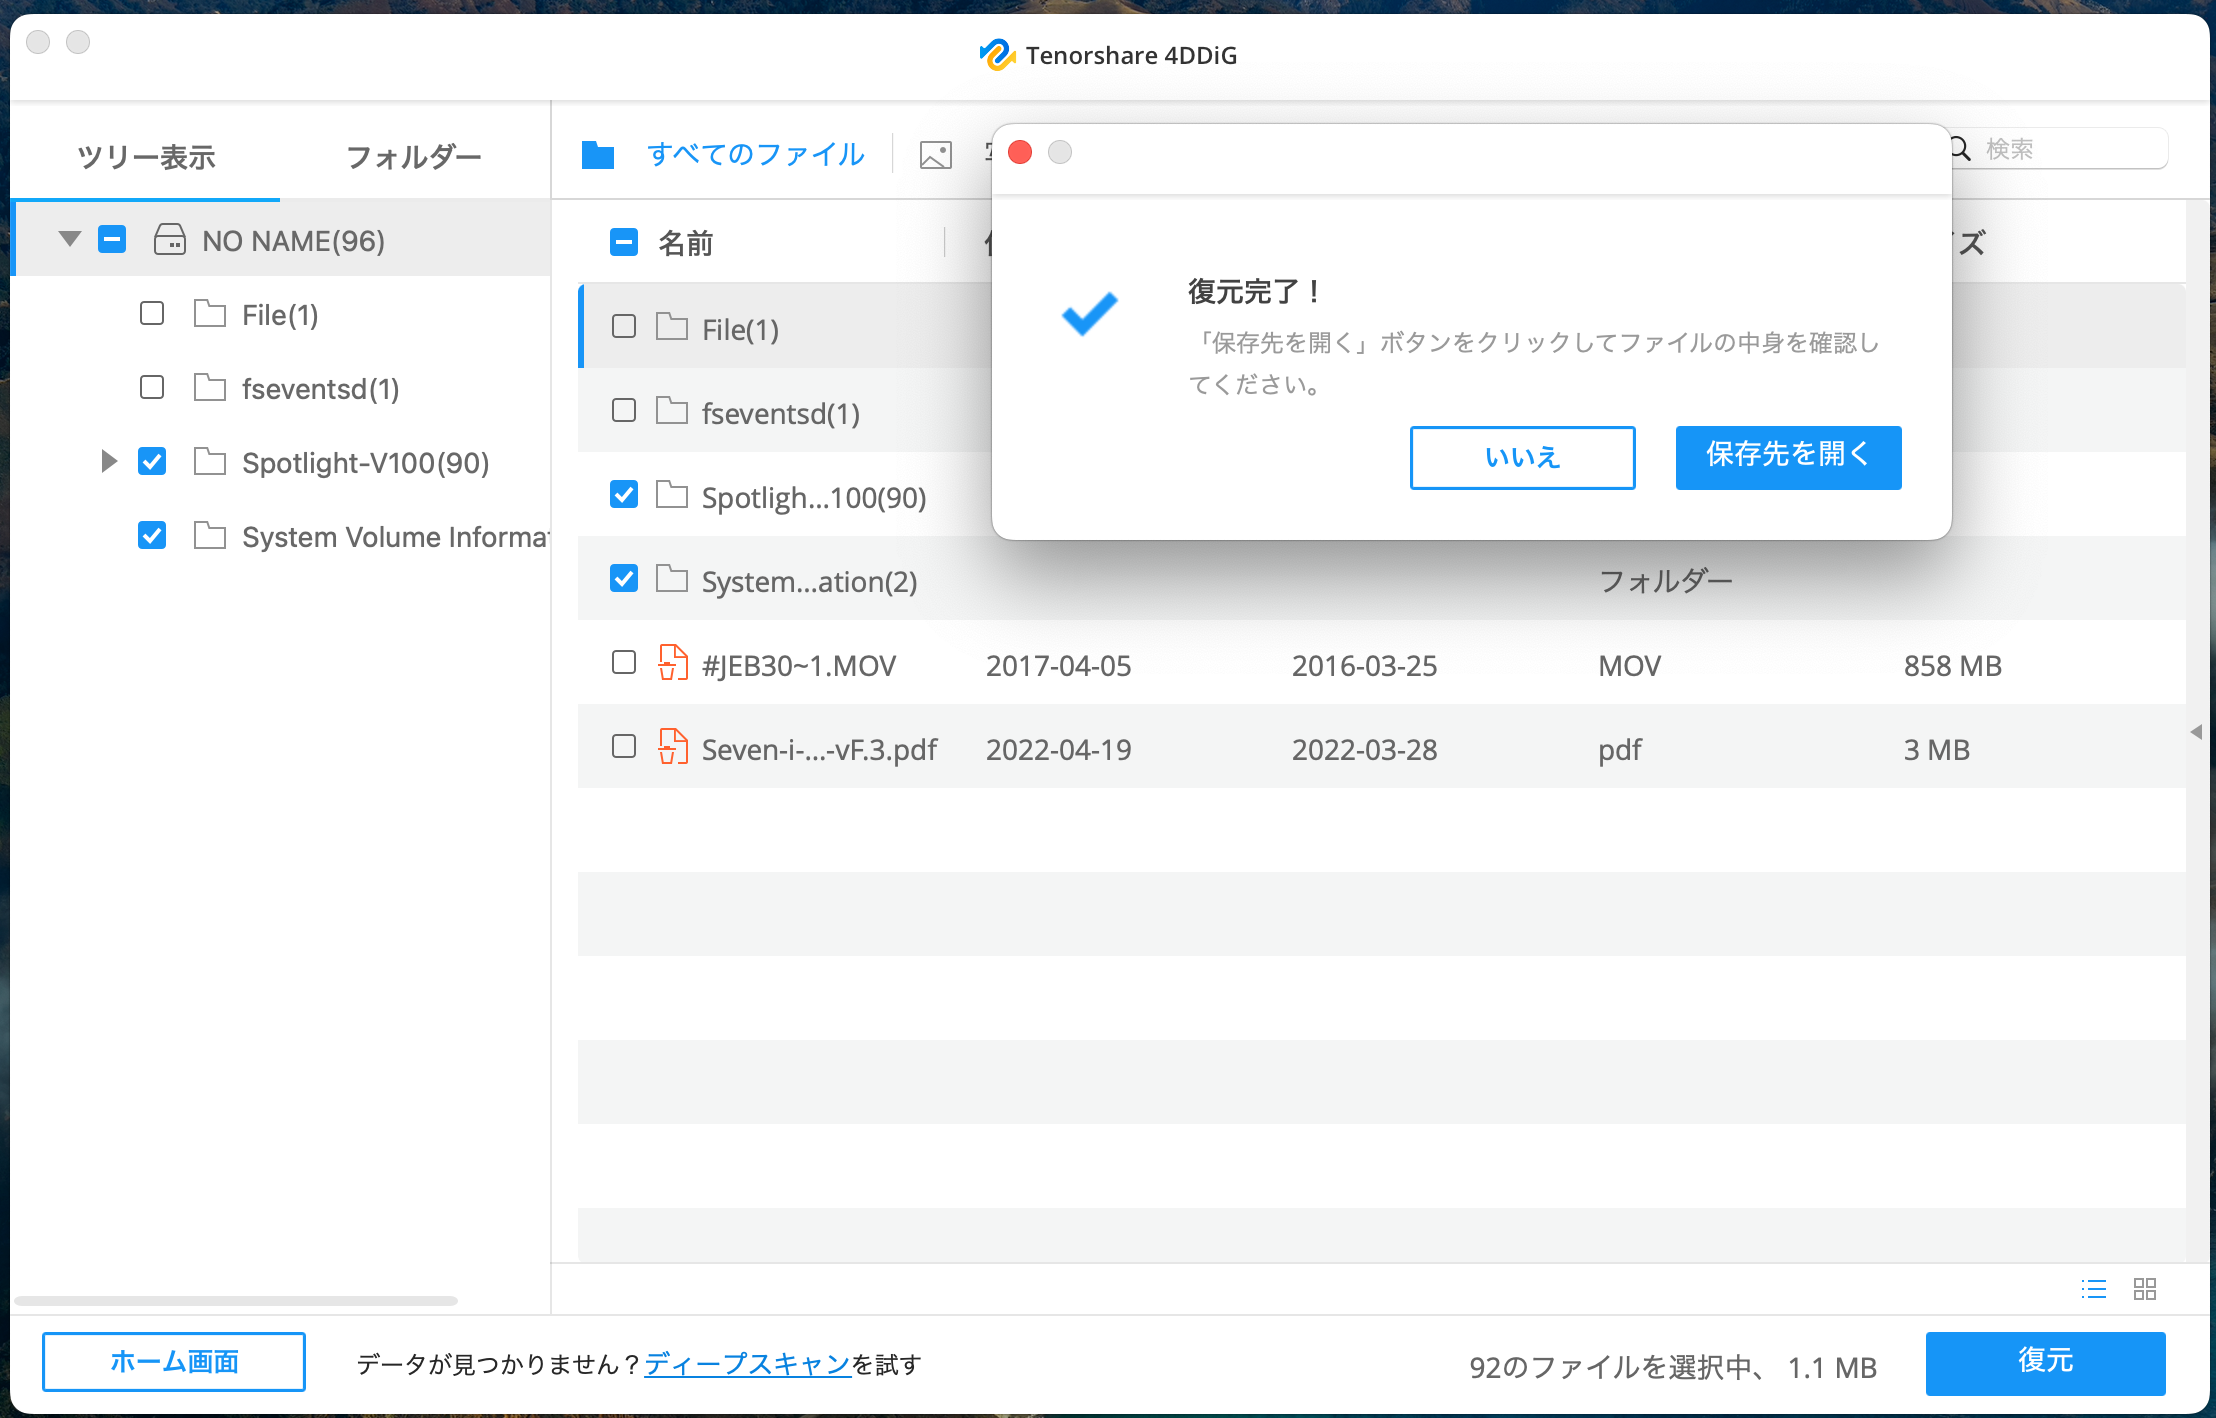 for mac download Tenorshare 4DDiG 9.8.3.6